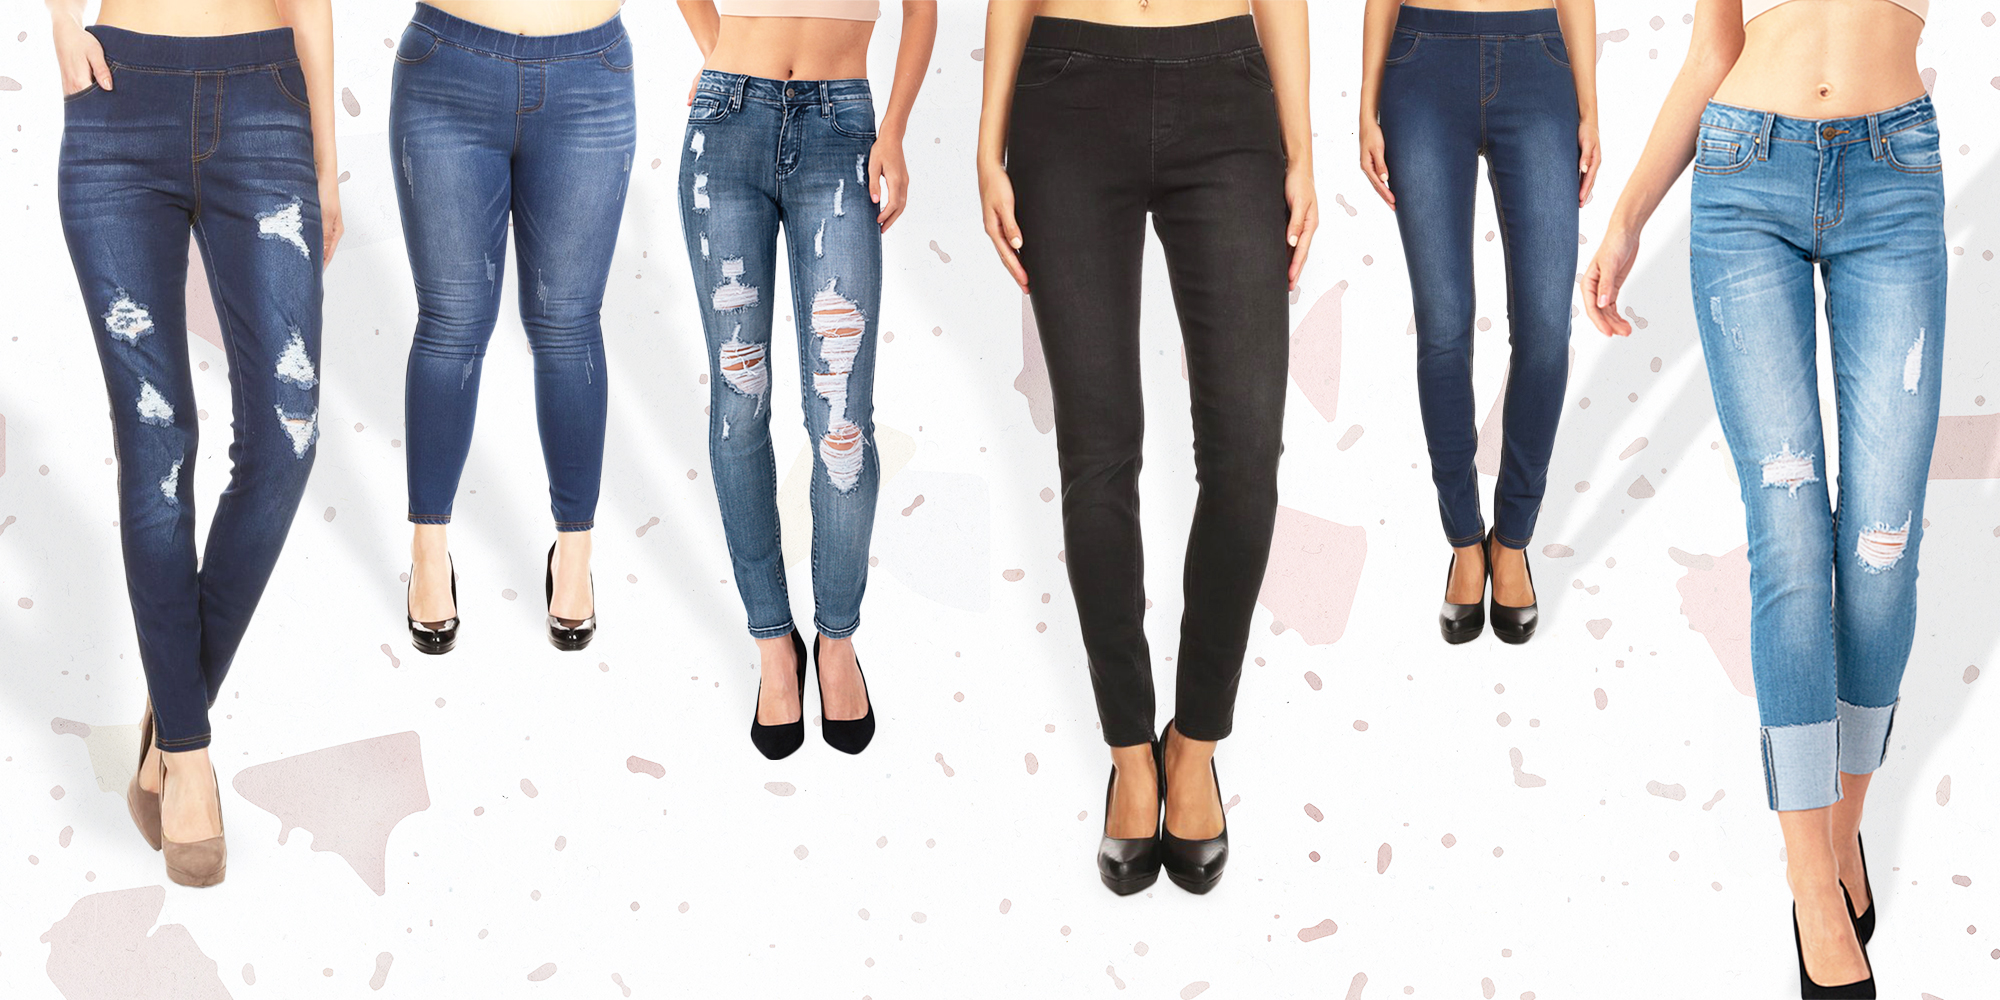 Wholesale Women's Jeans, Jeggings at 